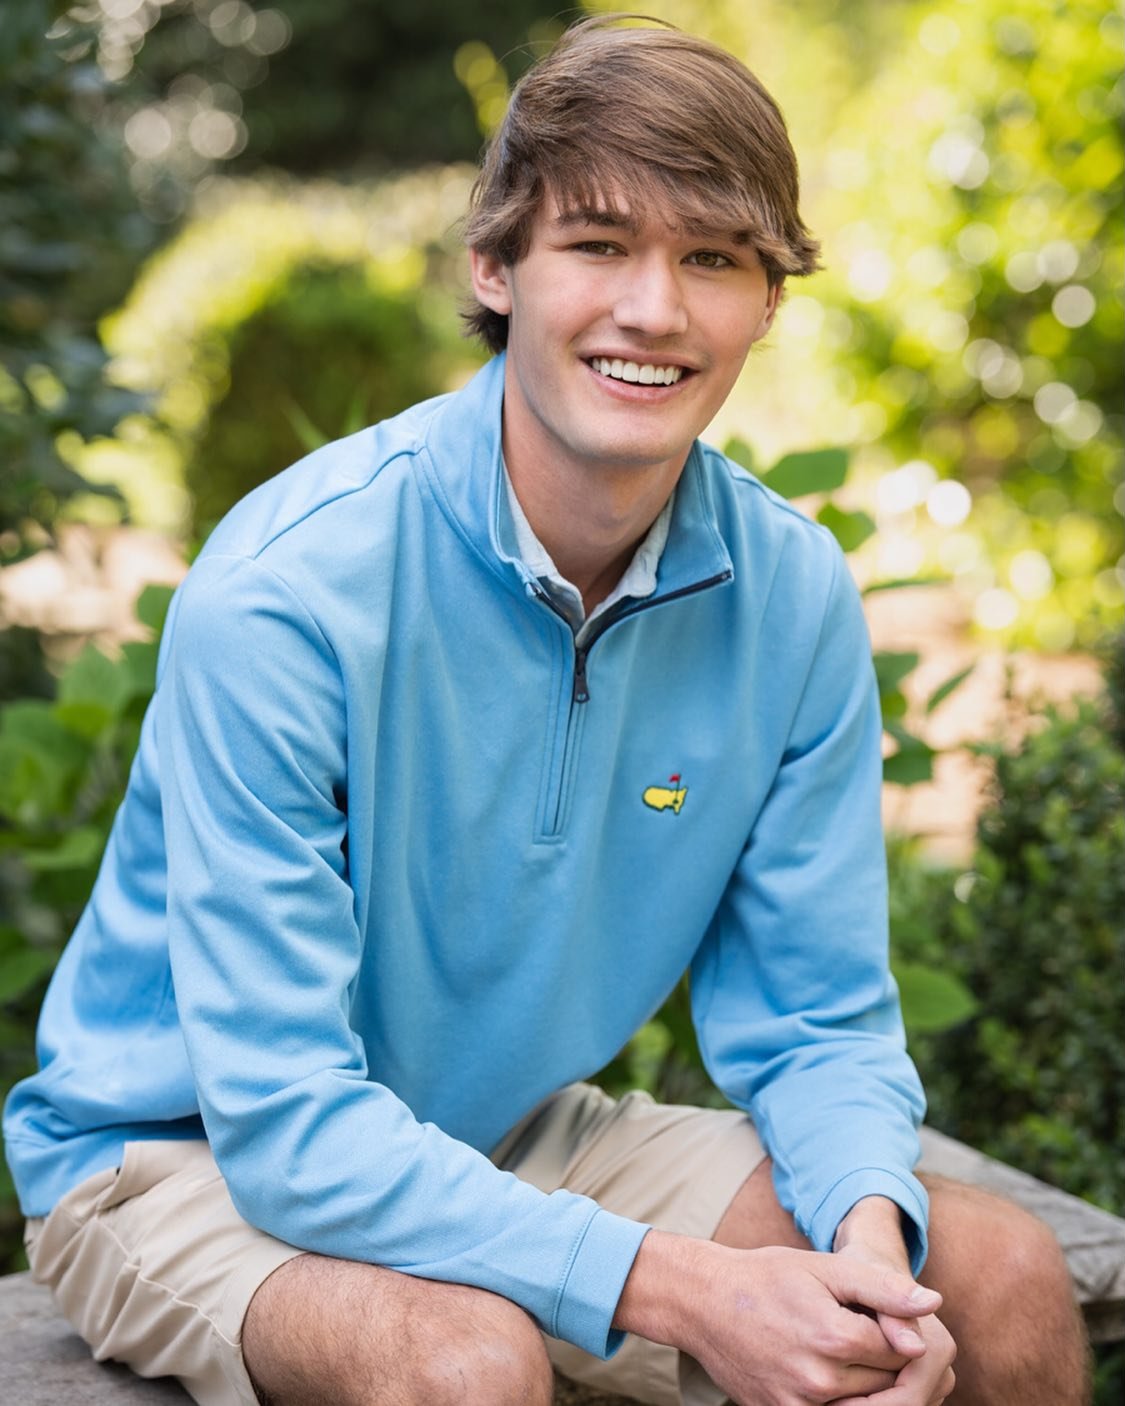 I&rsquo;m so happy I got to take this handsome senior&rsquo;s portraits!  Thank you for coming up from Pinehurst to get them taken.